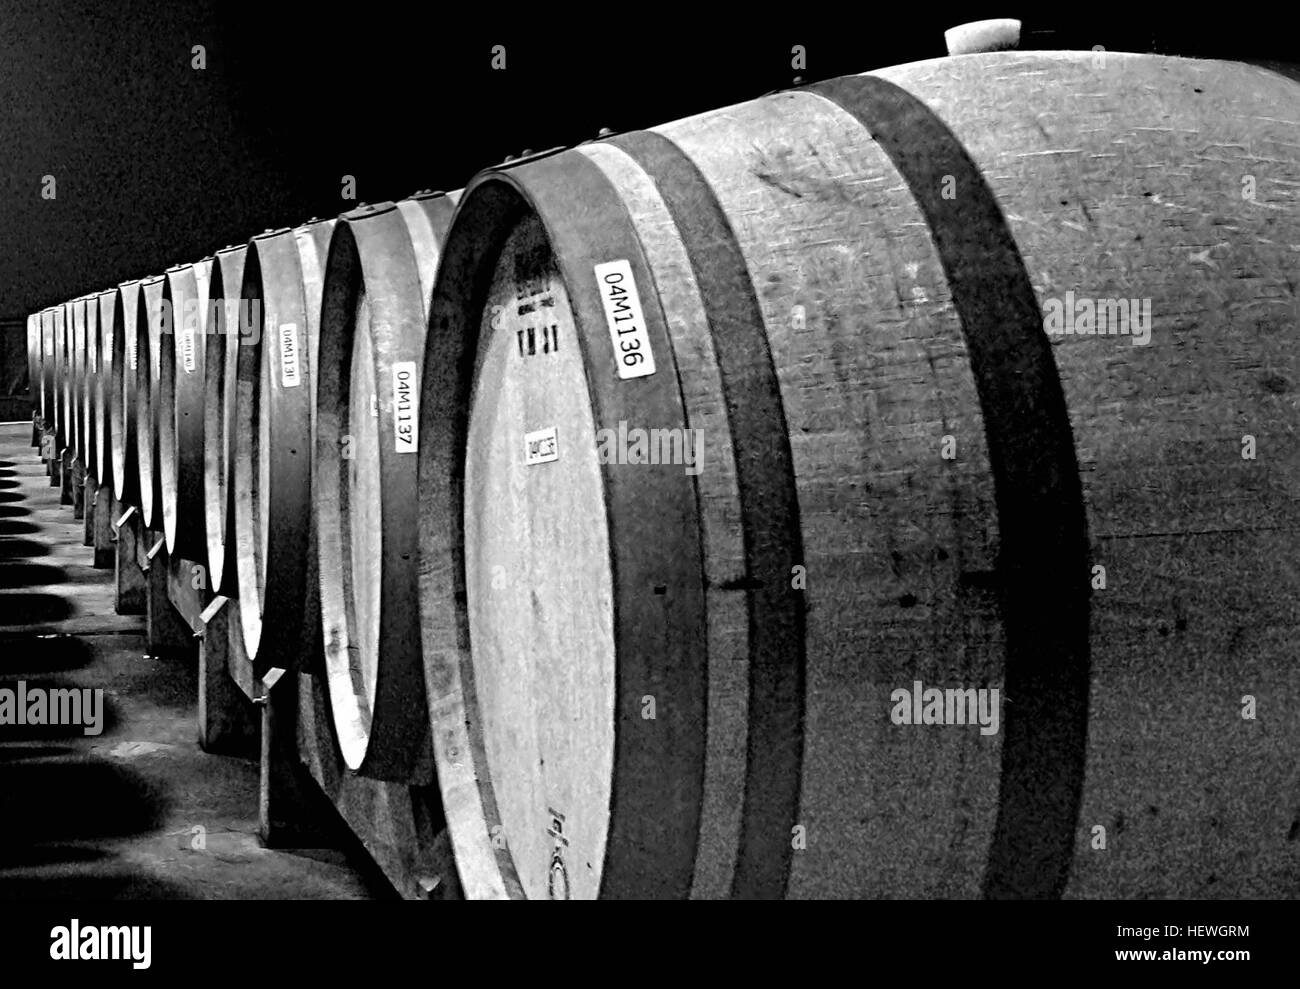 The use of oak plays a significant role in winemaking and can have a profound effect on the resulting wine, affecting the color, flavor, tannin profile and texture of the wine. Oak can come into contact with wine in the form of a barrel during the fermentation or aging periods. It can be introduced to the wine in the form of free-floating oak chips or as wood staves (or sticks) added to wine in a fermentation vessel like stainless steel. The use of oak barrels can impart other qualities to wine through the processes of evaporation and low level exposure to oxygen Stock Photo